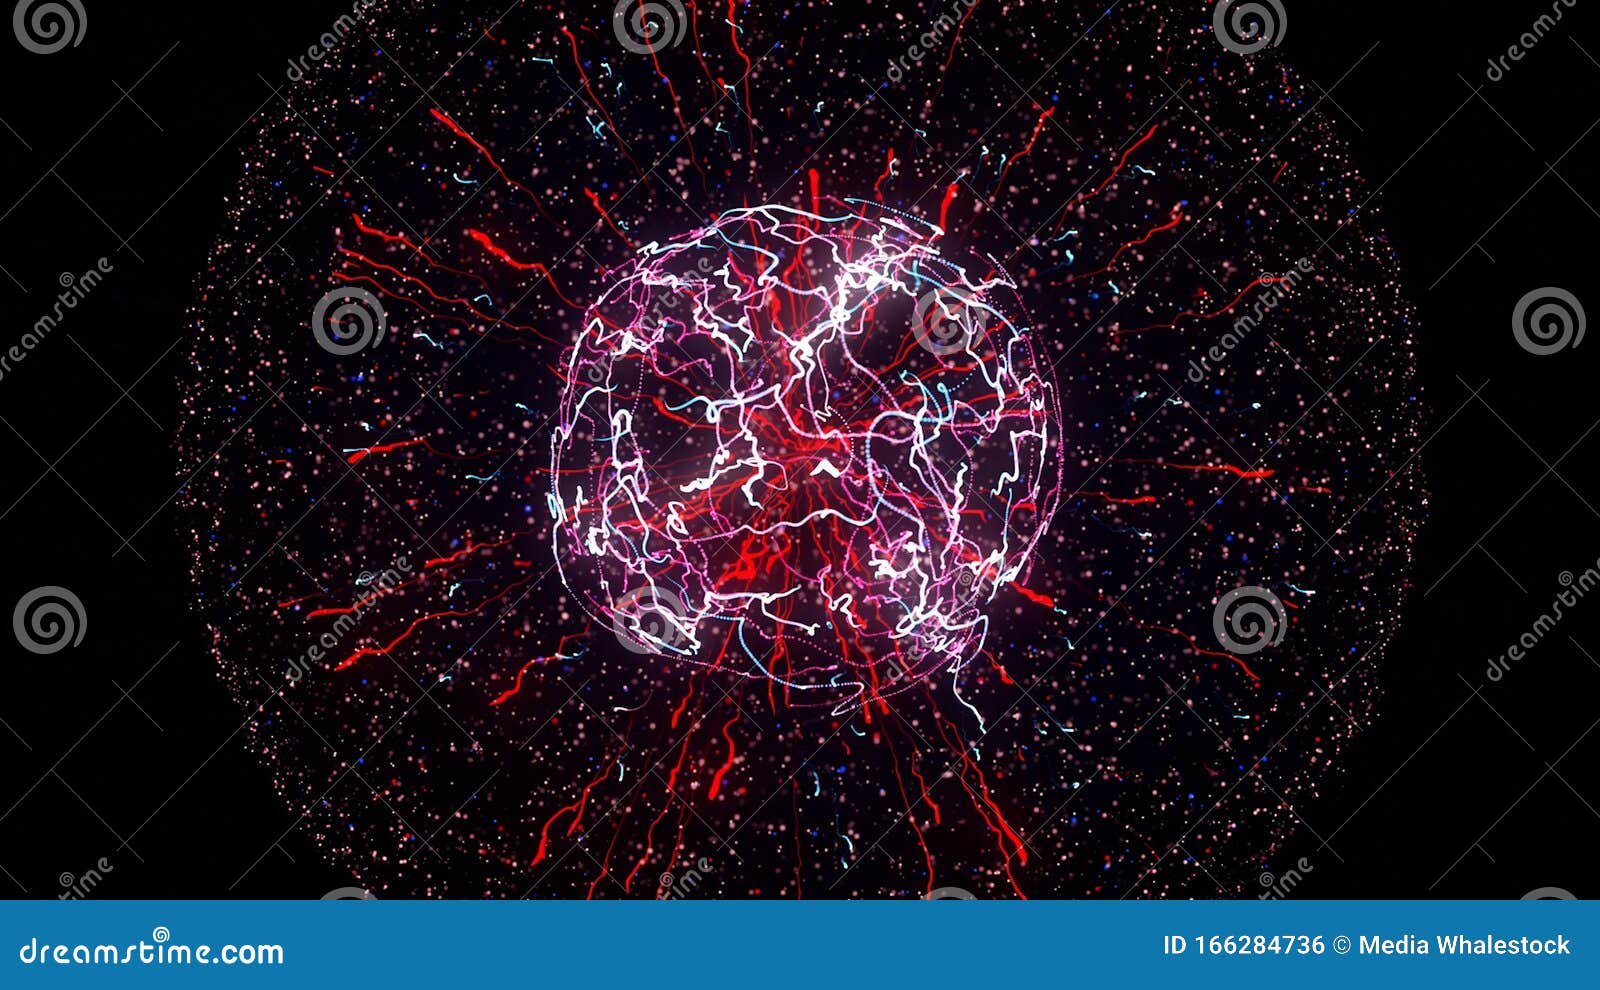 Abstract Colorful Explosion of Neon Nucleus Isolated on Black Background.  Animation. Amazing 3d Impulse Spreading into Stock Illustration -  Illustration of gamma, atom: 166284736